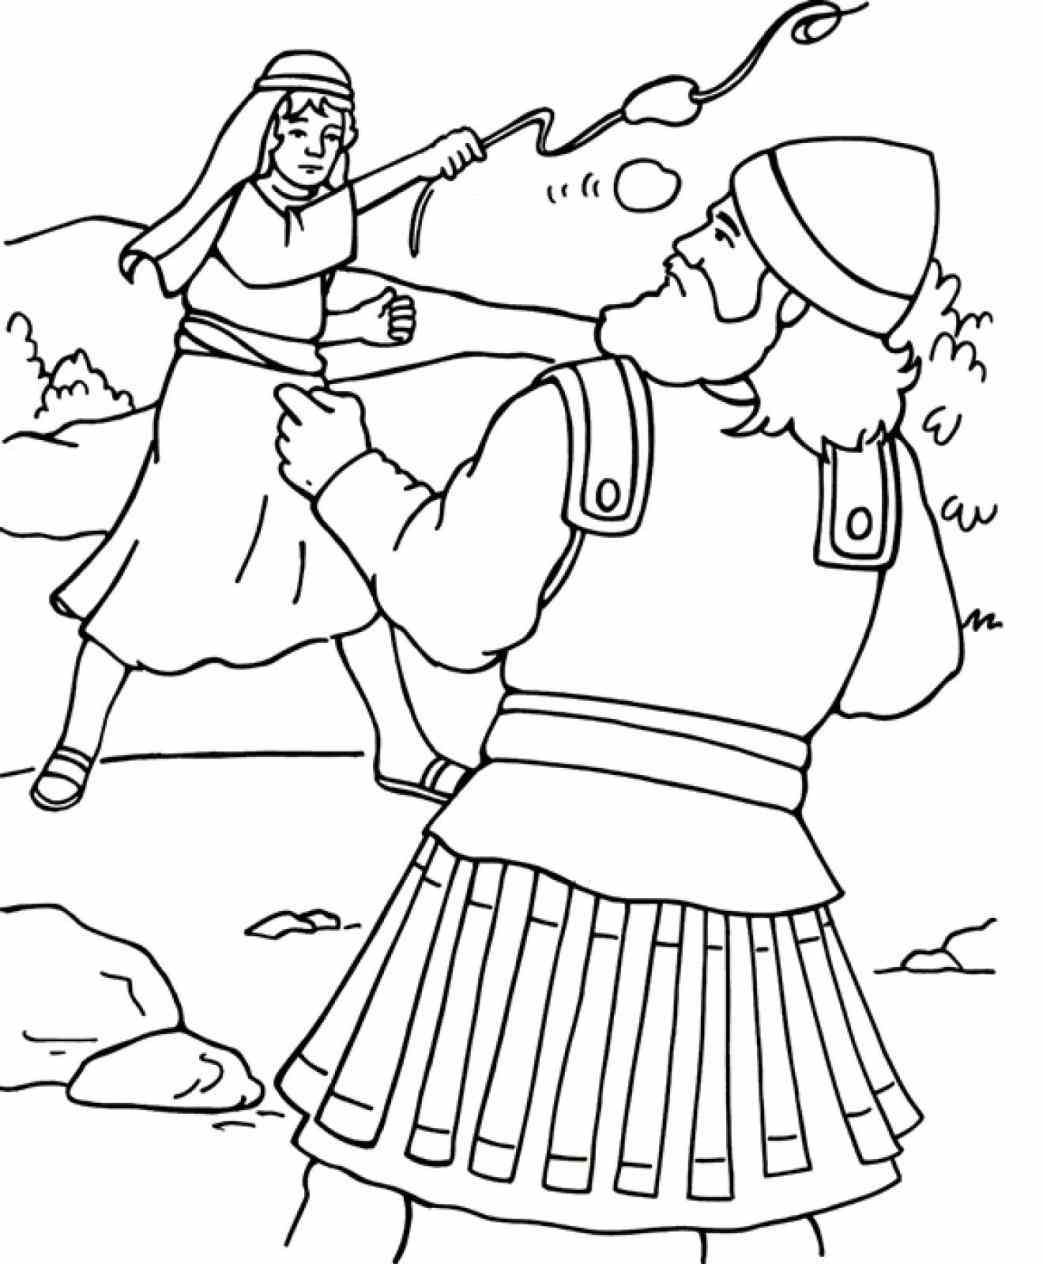 david and goliath bible story coloring pages